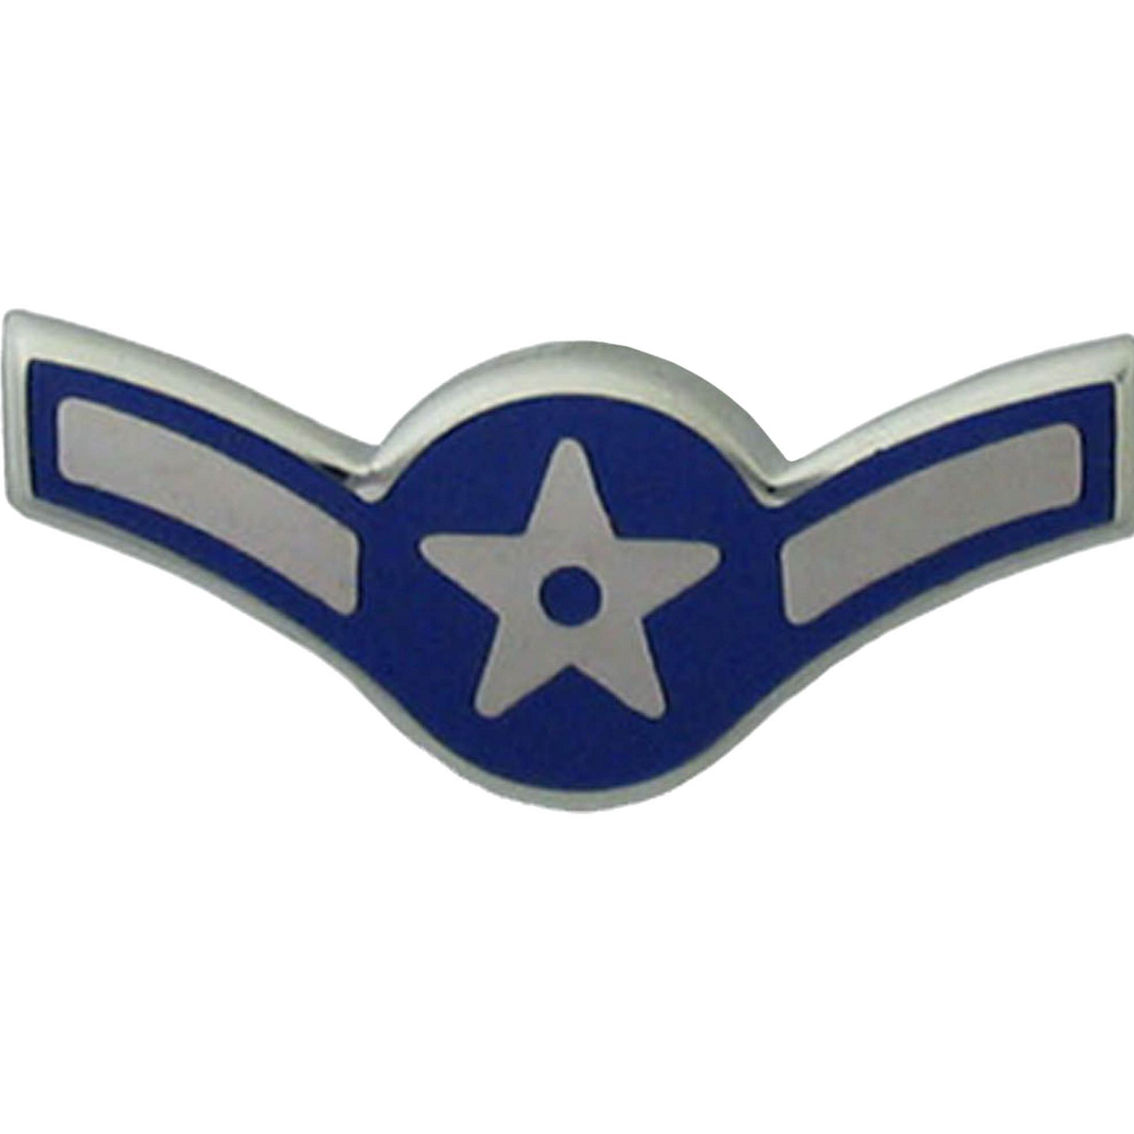 Air Force Rank Amn E 2 Metal Pin On Enlisted Metal Pin On Rank